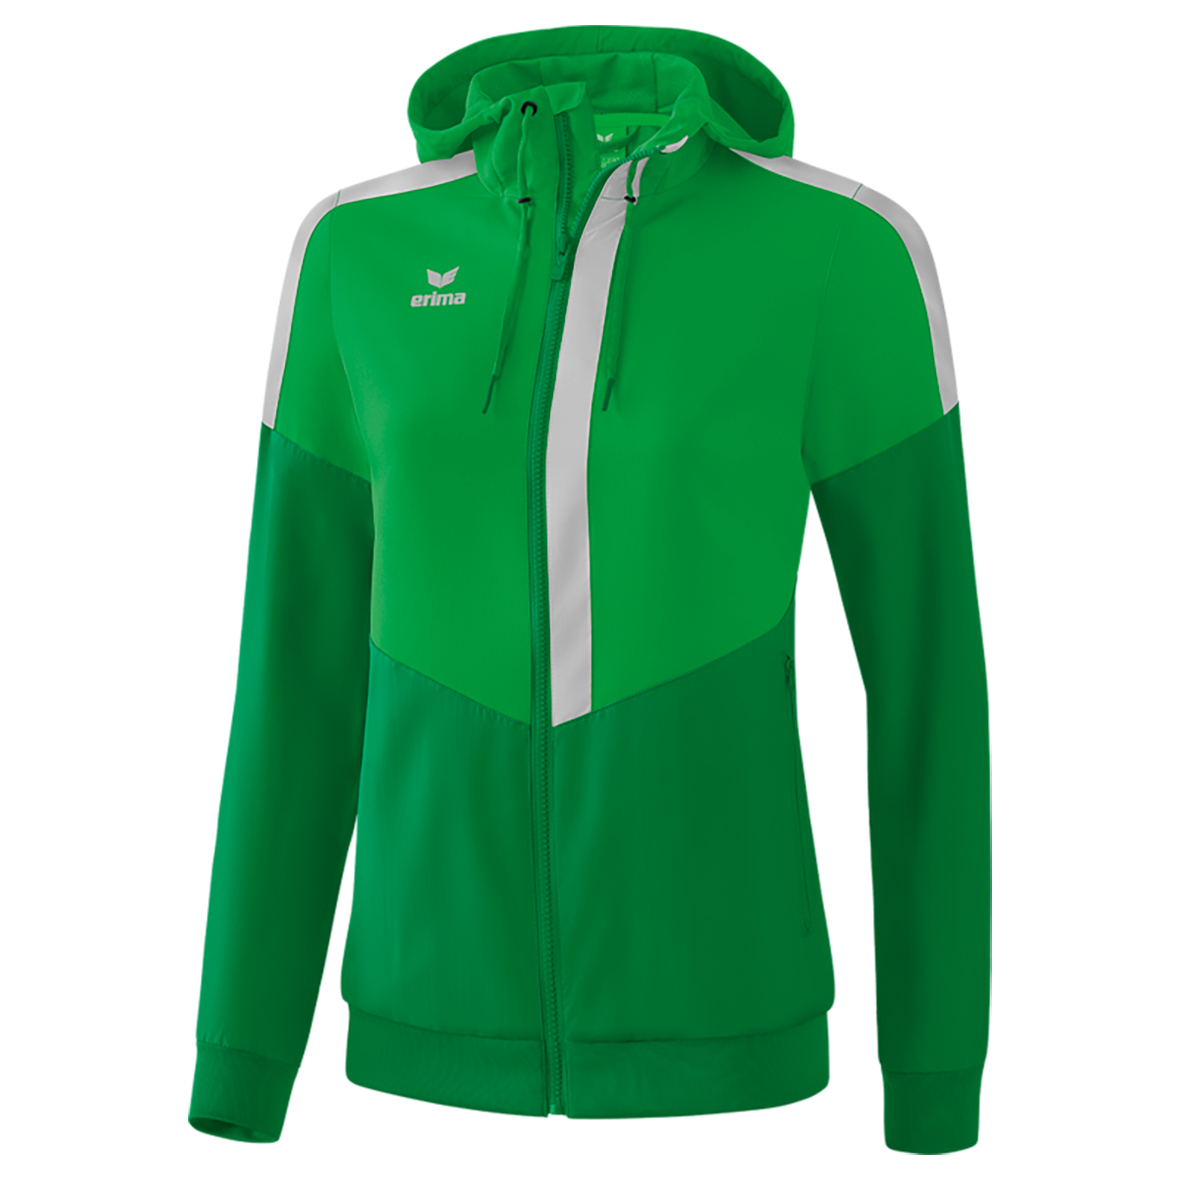 ERIMA SQUAD TRACK TOP JACKET WITH HOOD, GREEN-EMERALD-SILVER WOMEN.